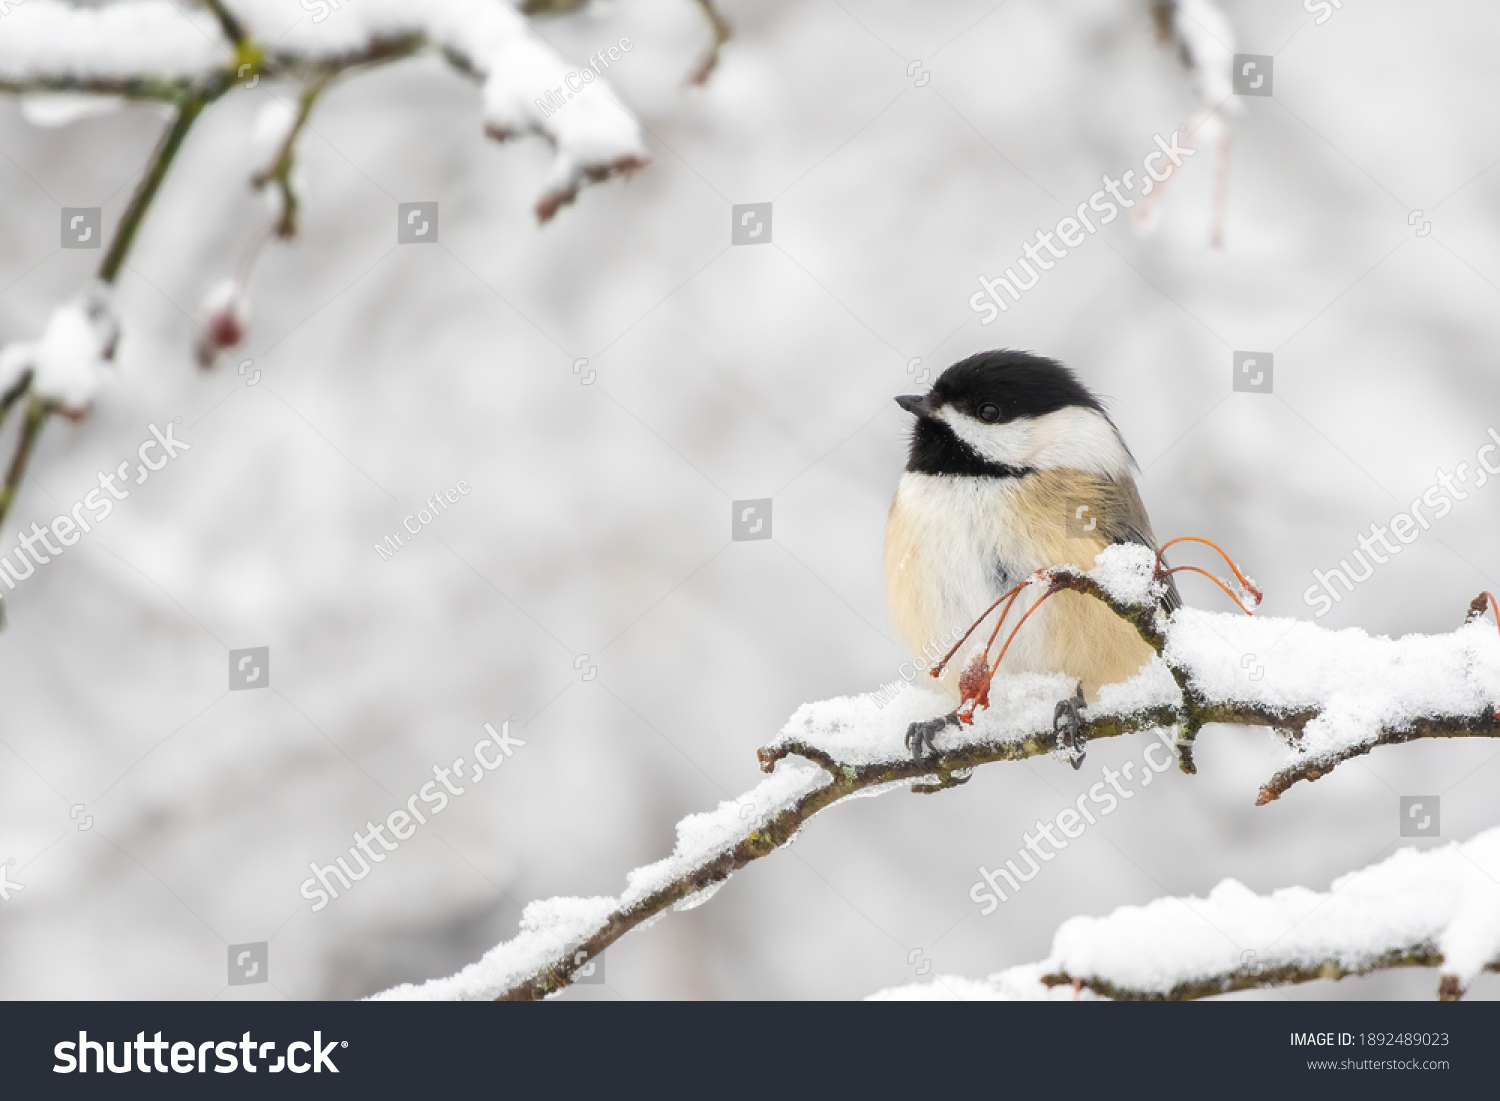 Black-capped Chickadee perched on a branch and looks like a little egg #1892489023